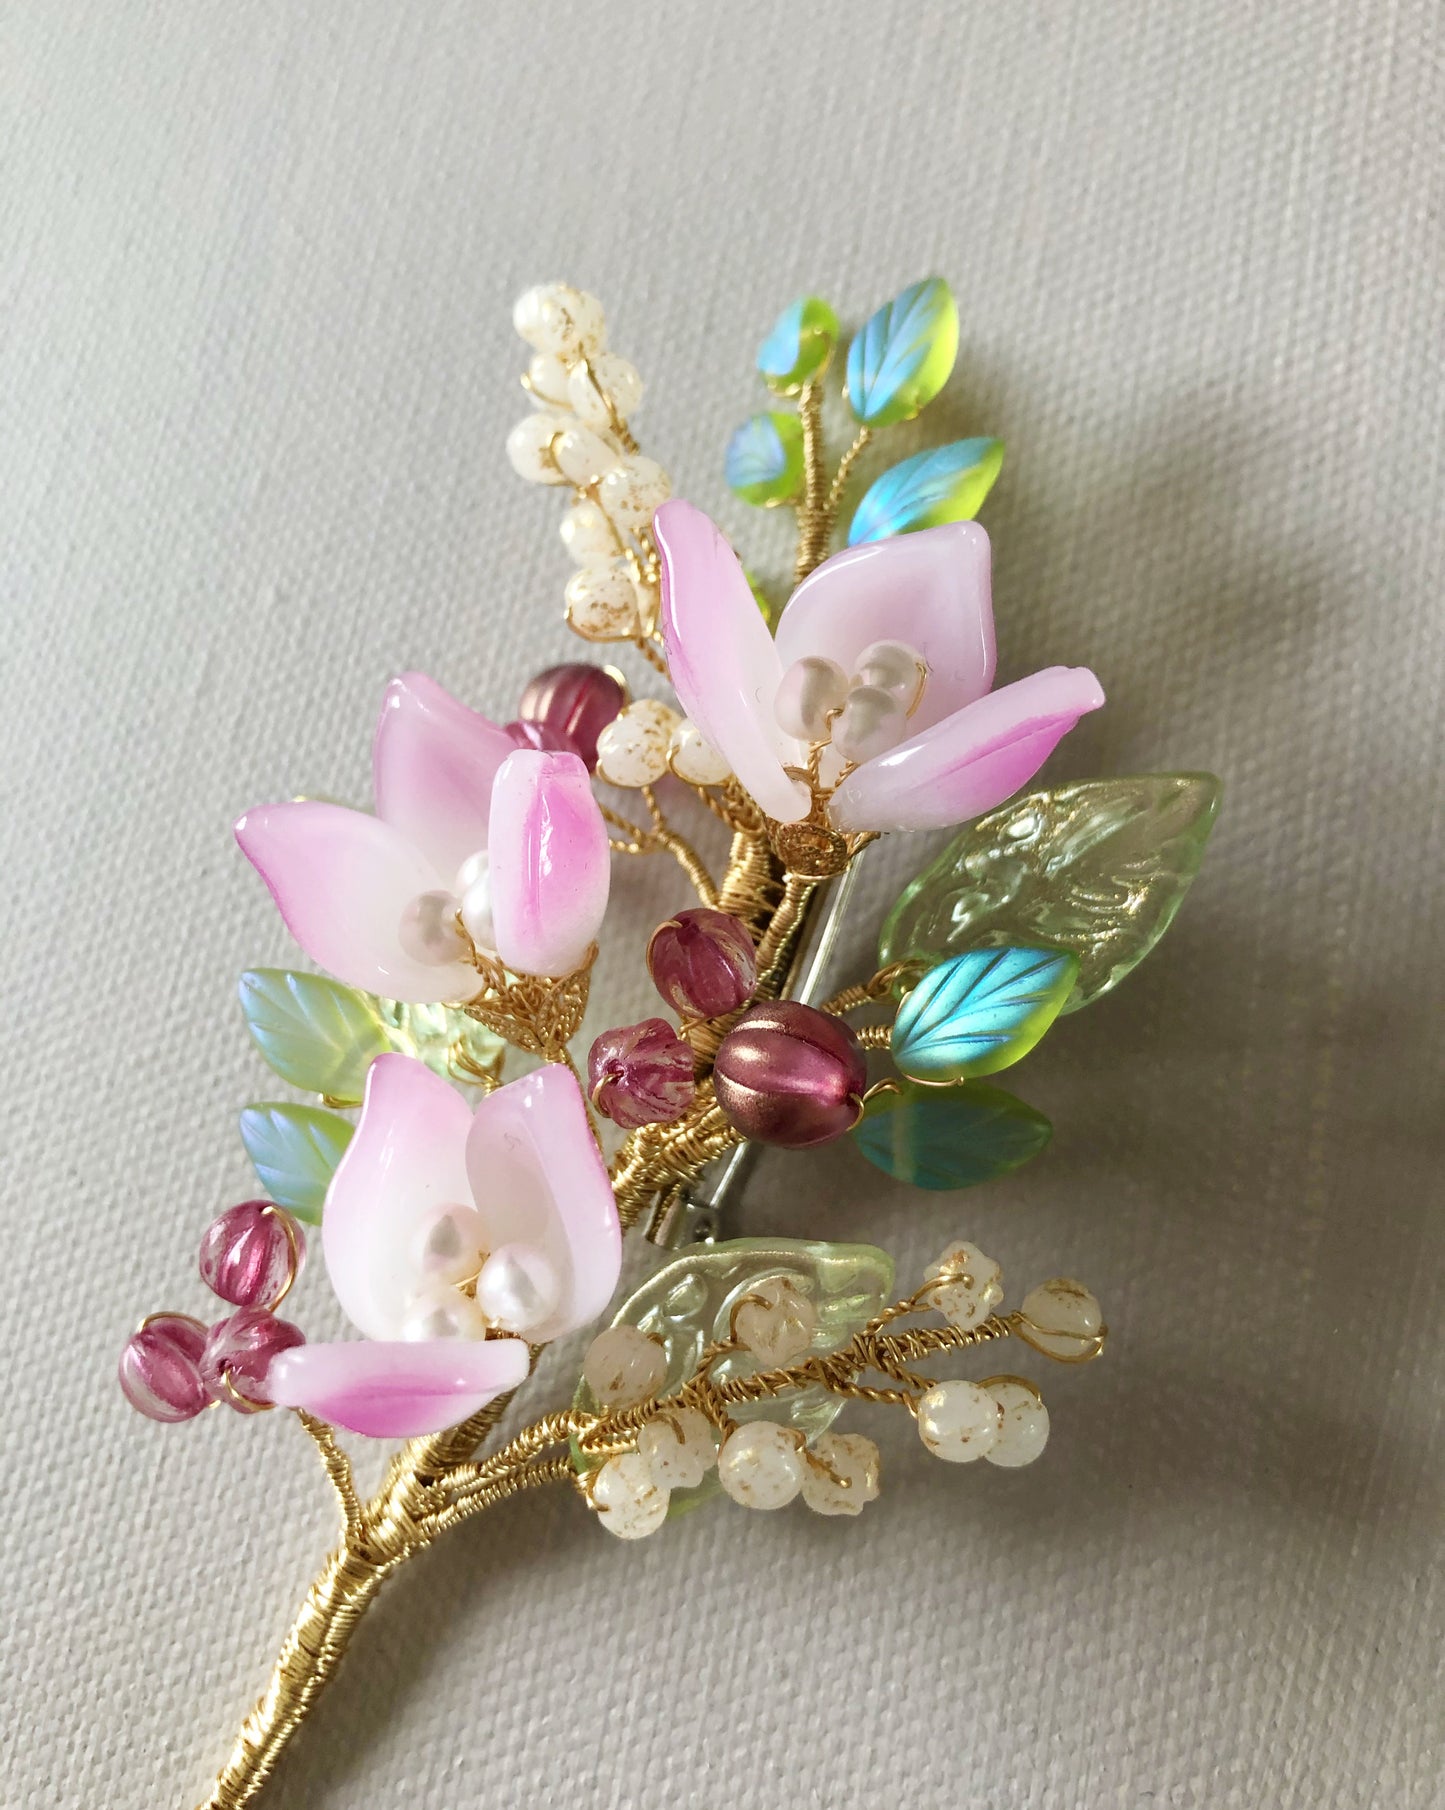 《January Palette IV》Lily bouquet brooch in Chinese New Year pink